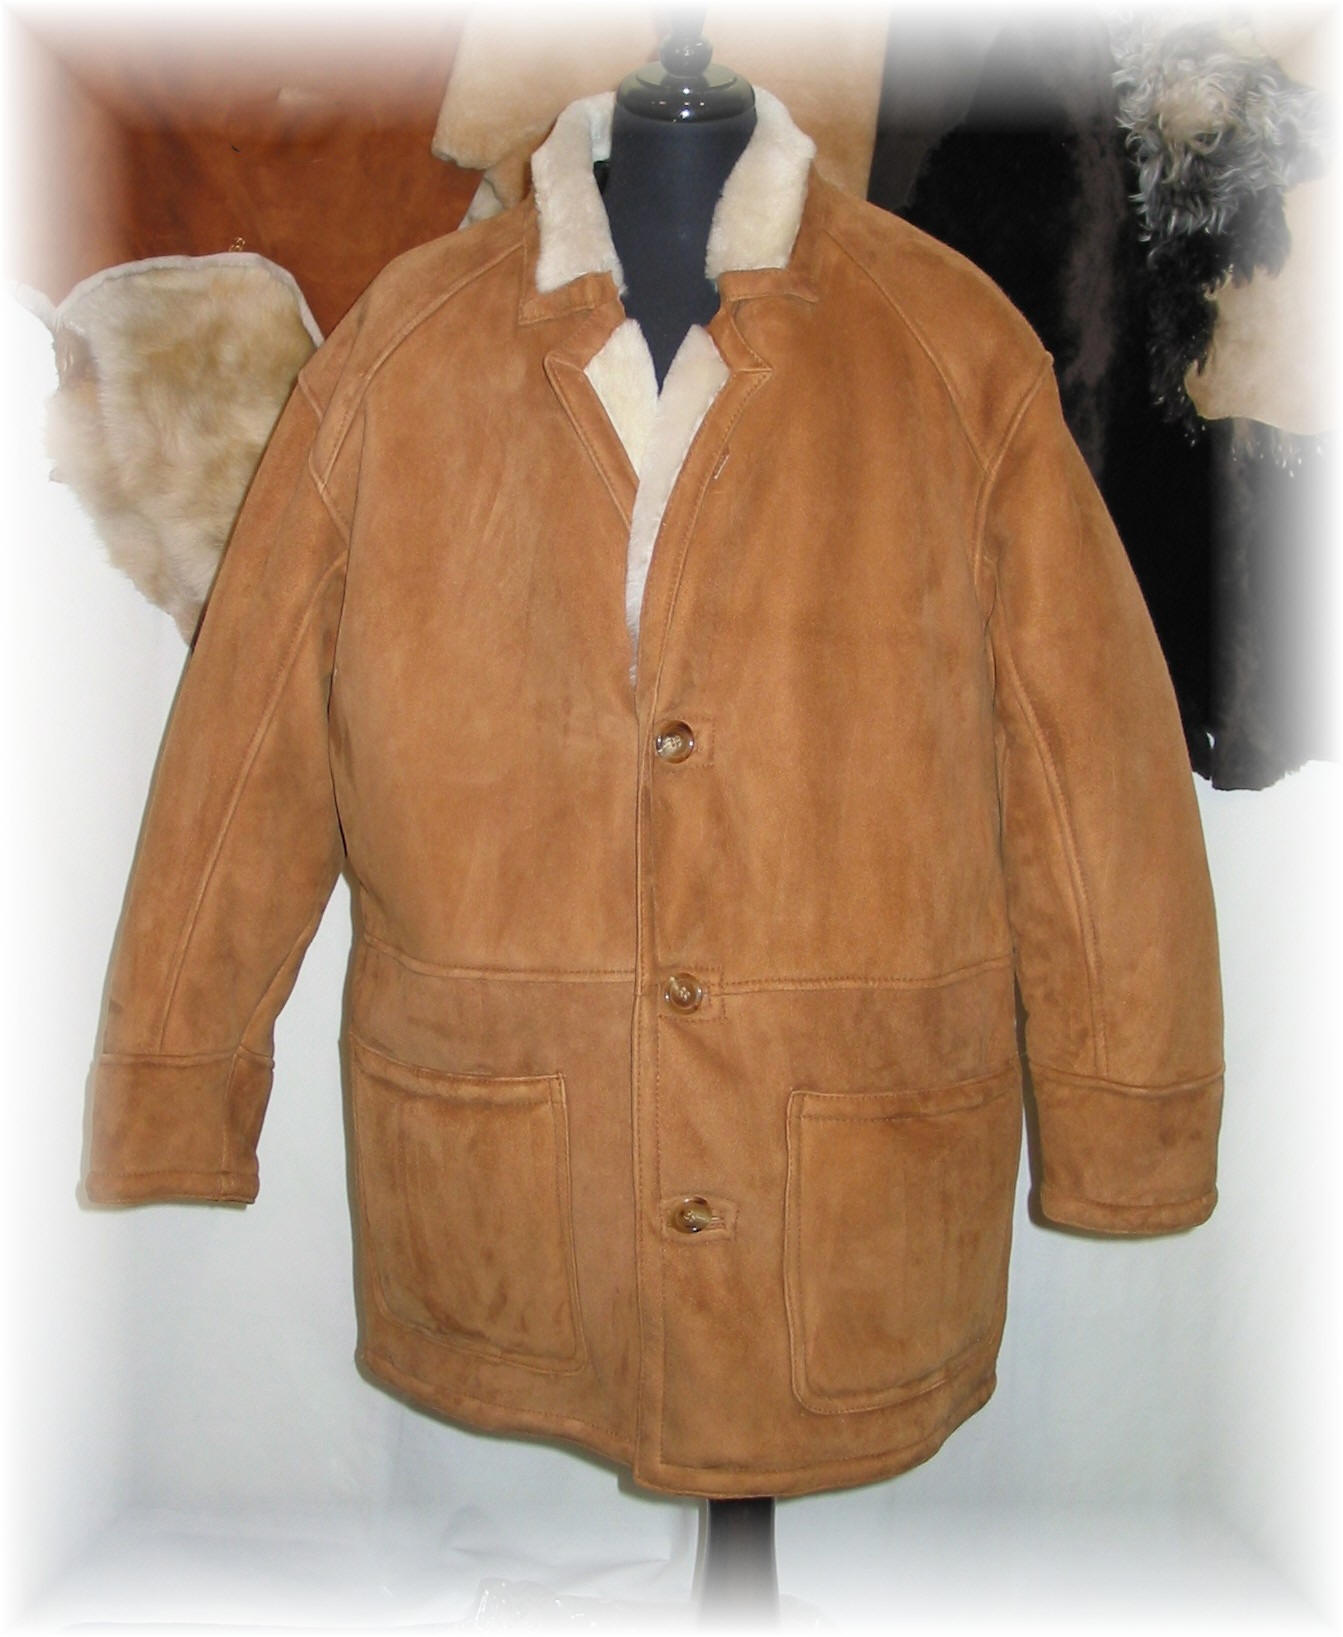 Shearling Big & Tall Coats for Men from Dann Clothing